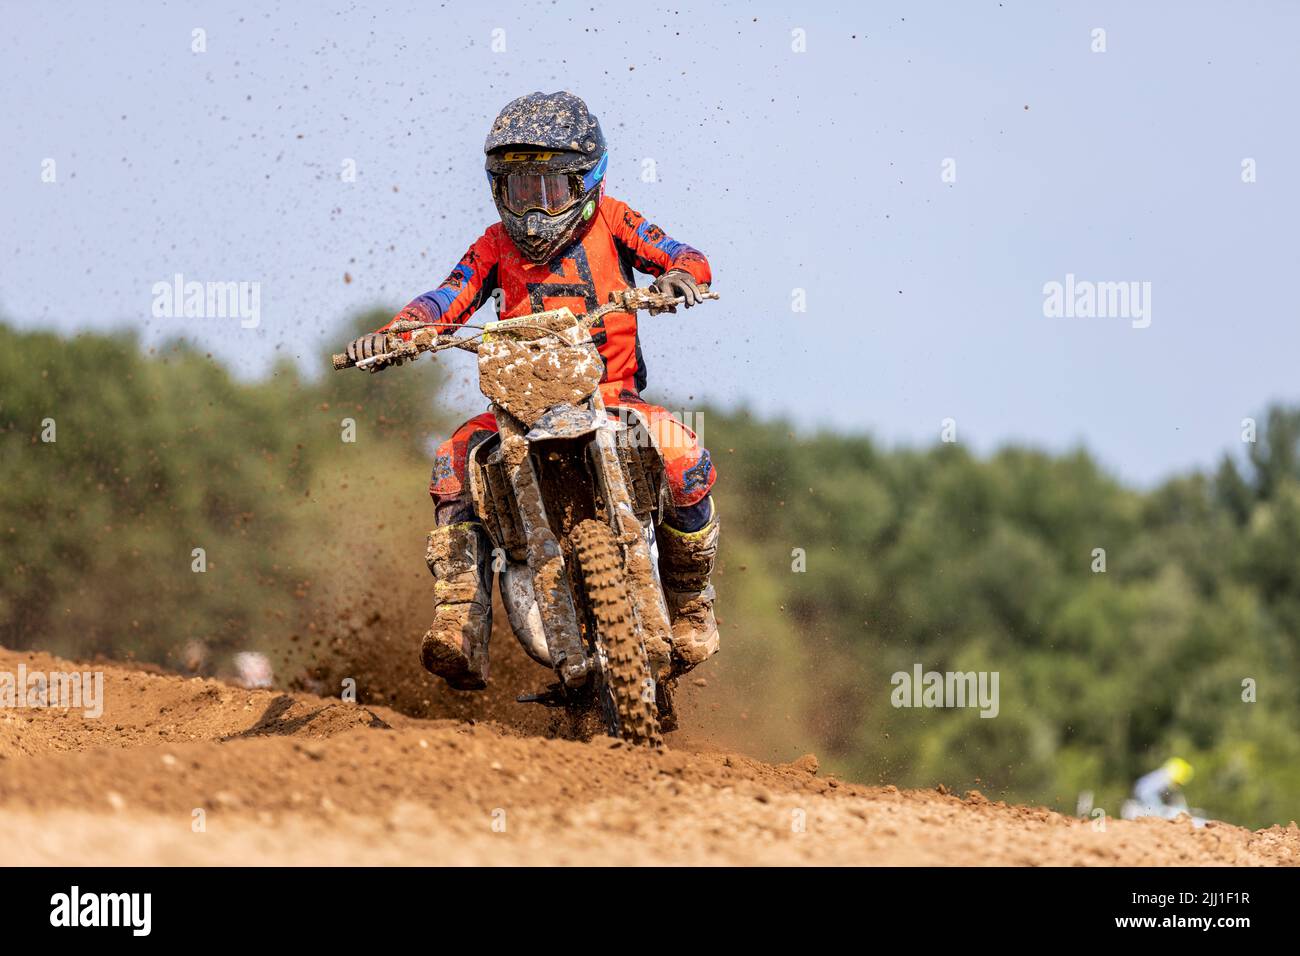 A motocross rider on a track practicing in Fulton, Missouri, USA Stock Photo